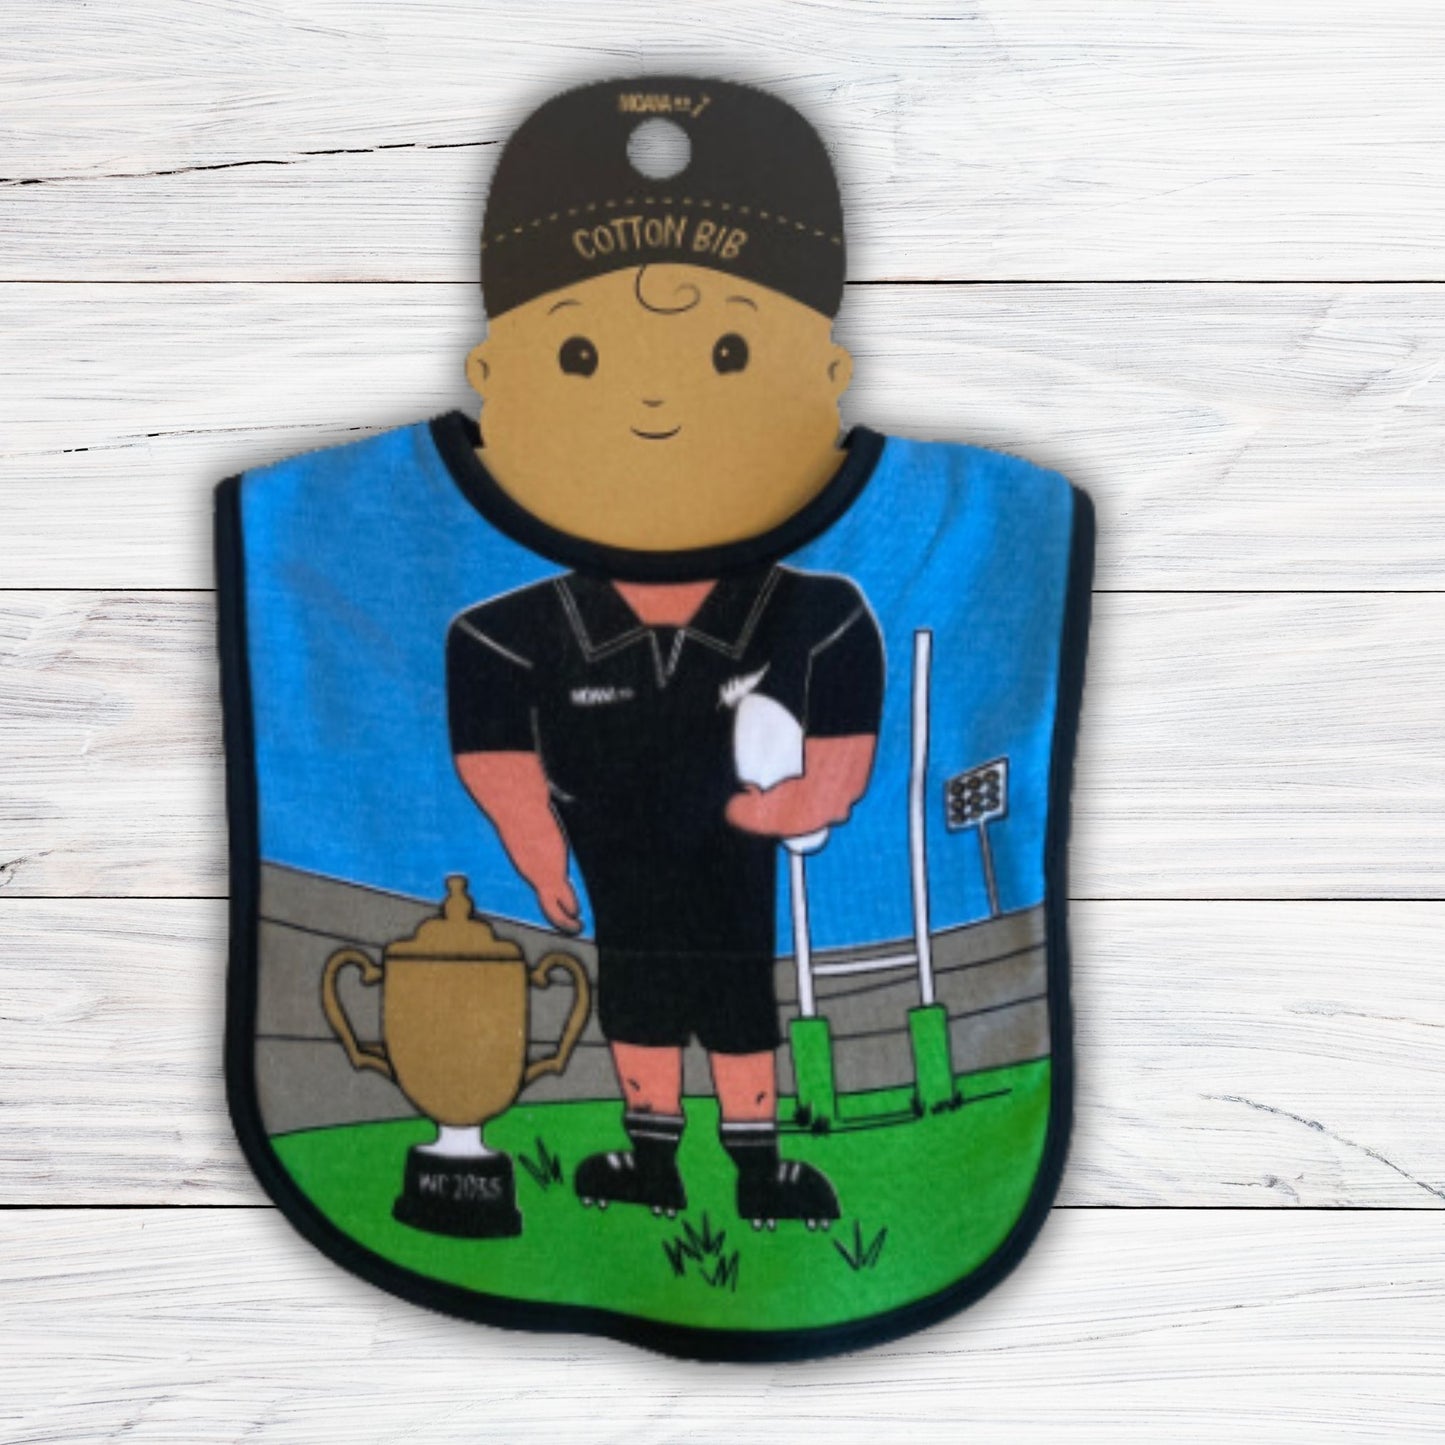 Baby bib featuring a rugby scene and body of a rugby player.